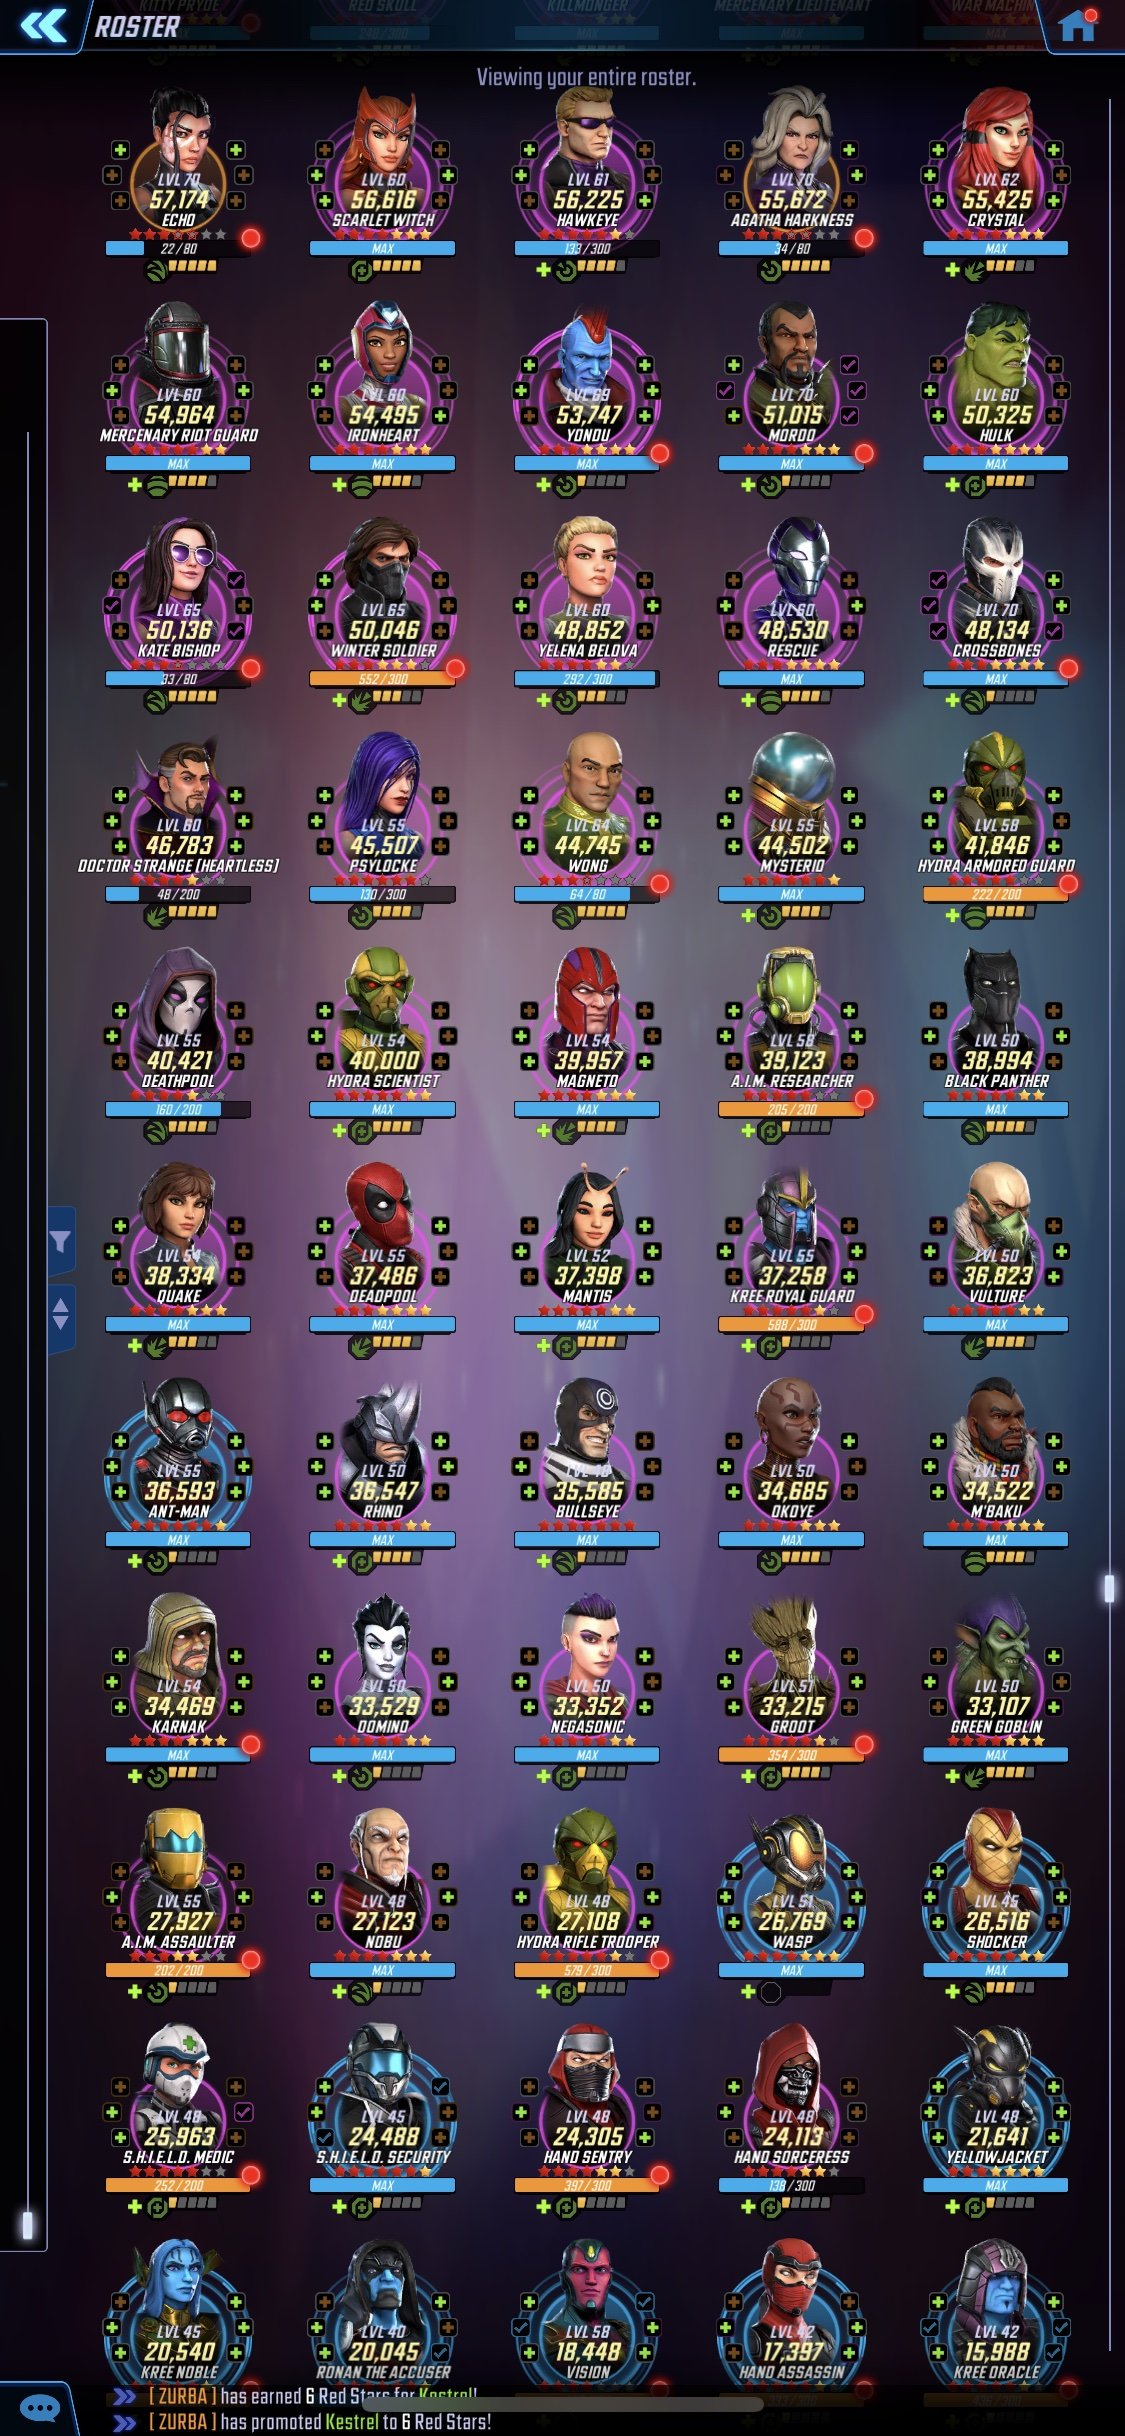 Marvel Strike Force - Top Blitz team and why.